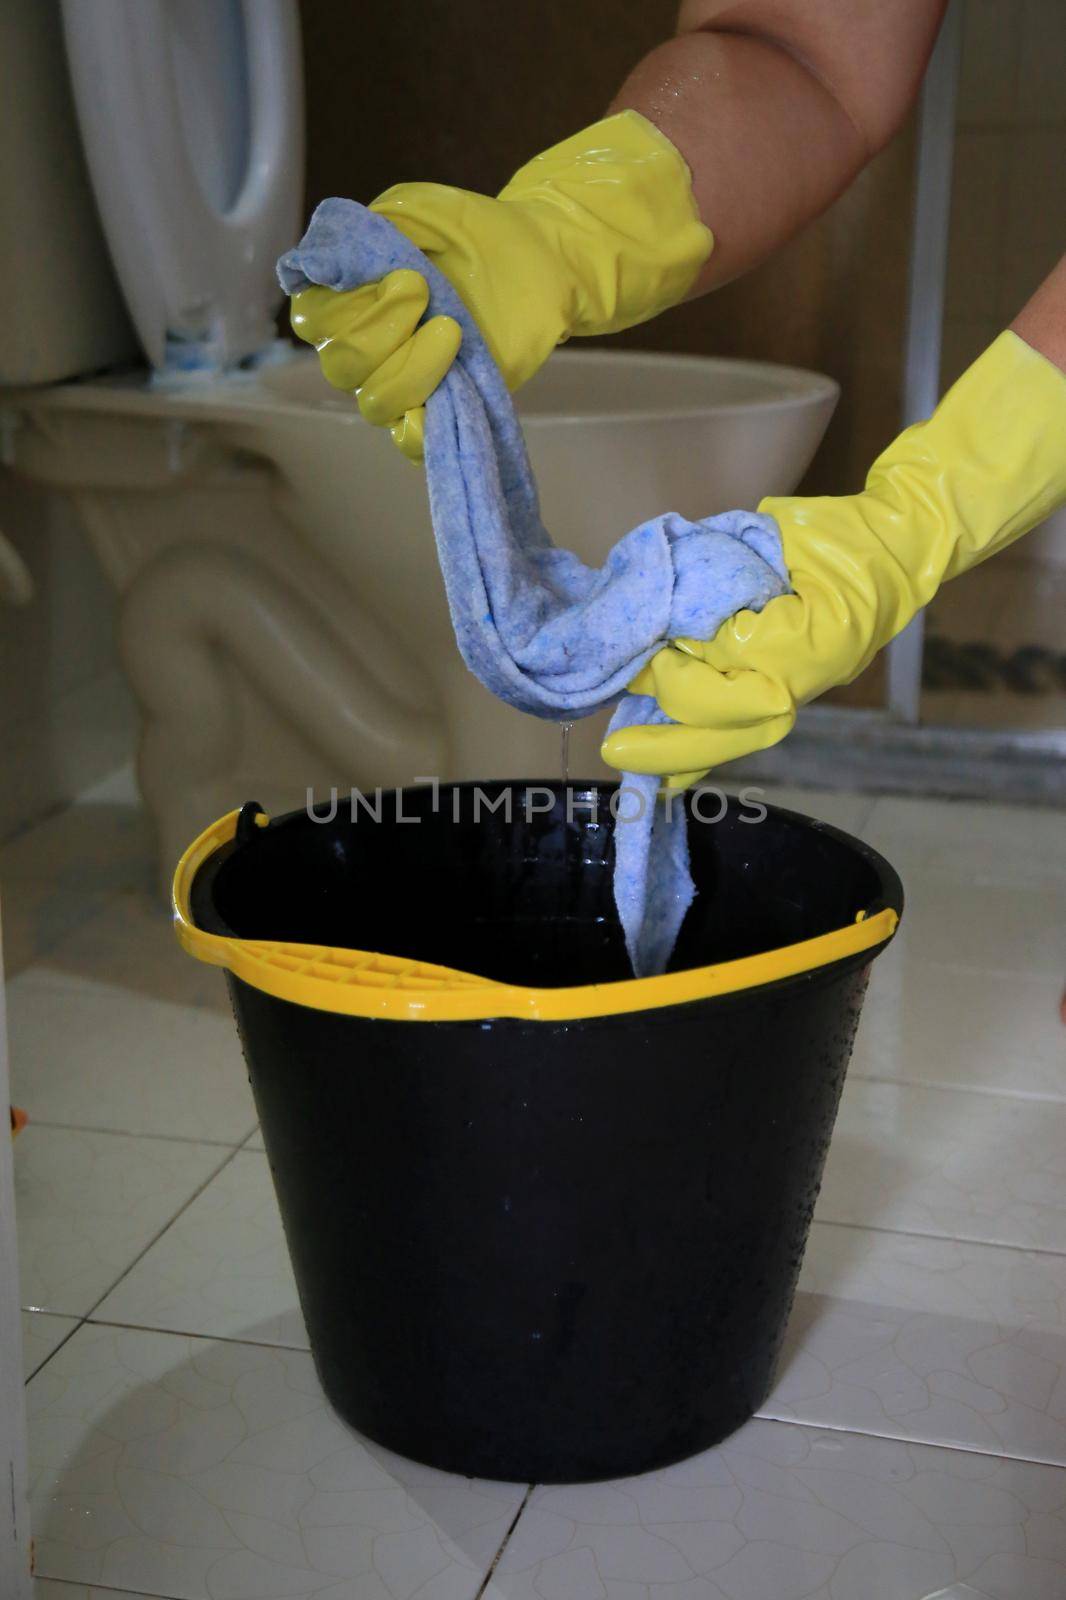 salvador, bahia, brazil - february 21, 2021: person wearing a rubber glove and holding a cloth next to a bucket while cleaning a bathroom in a residence in the city of Salvador.